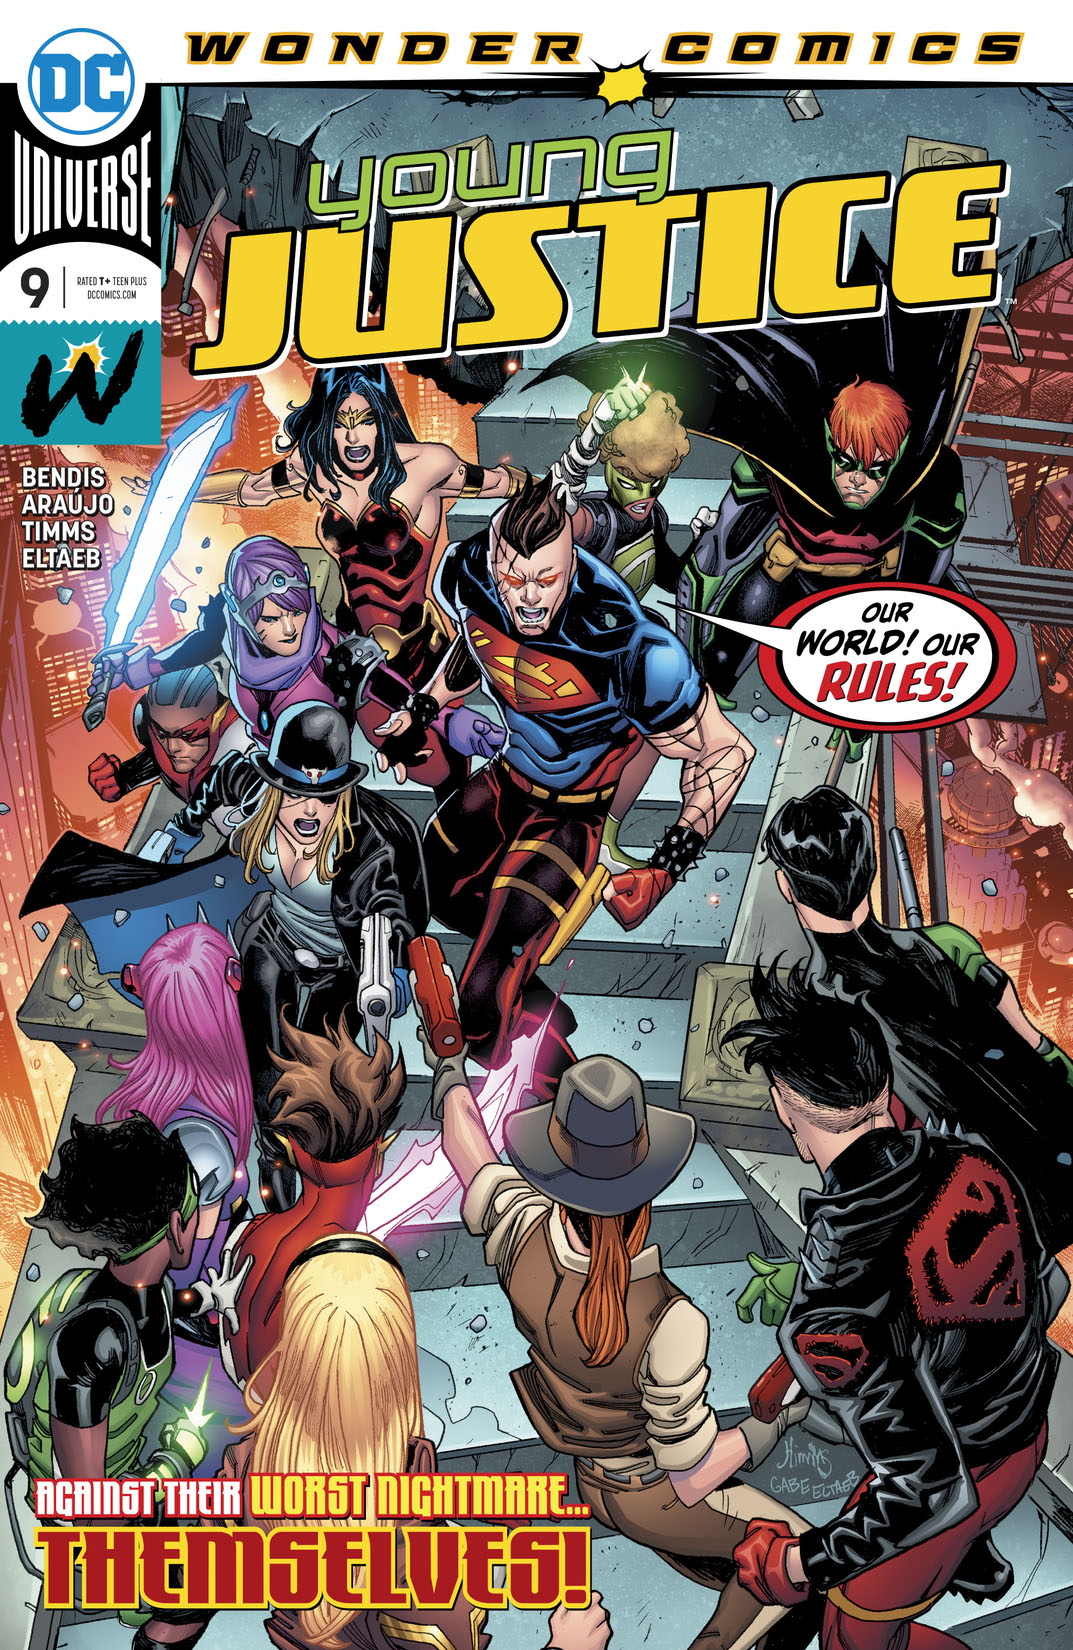 Young Justice (2019-) #9 preview images